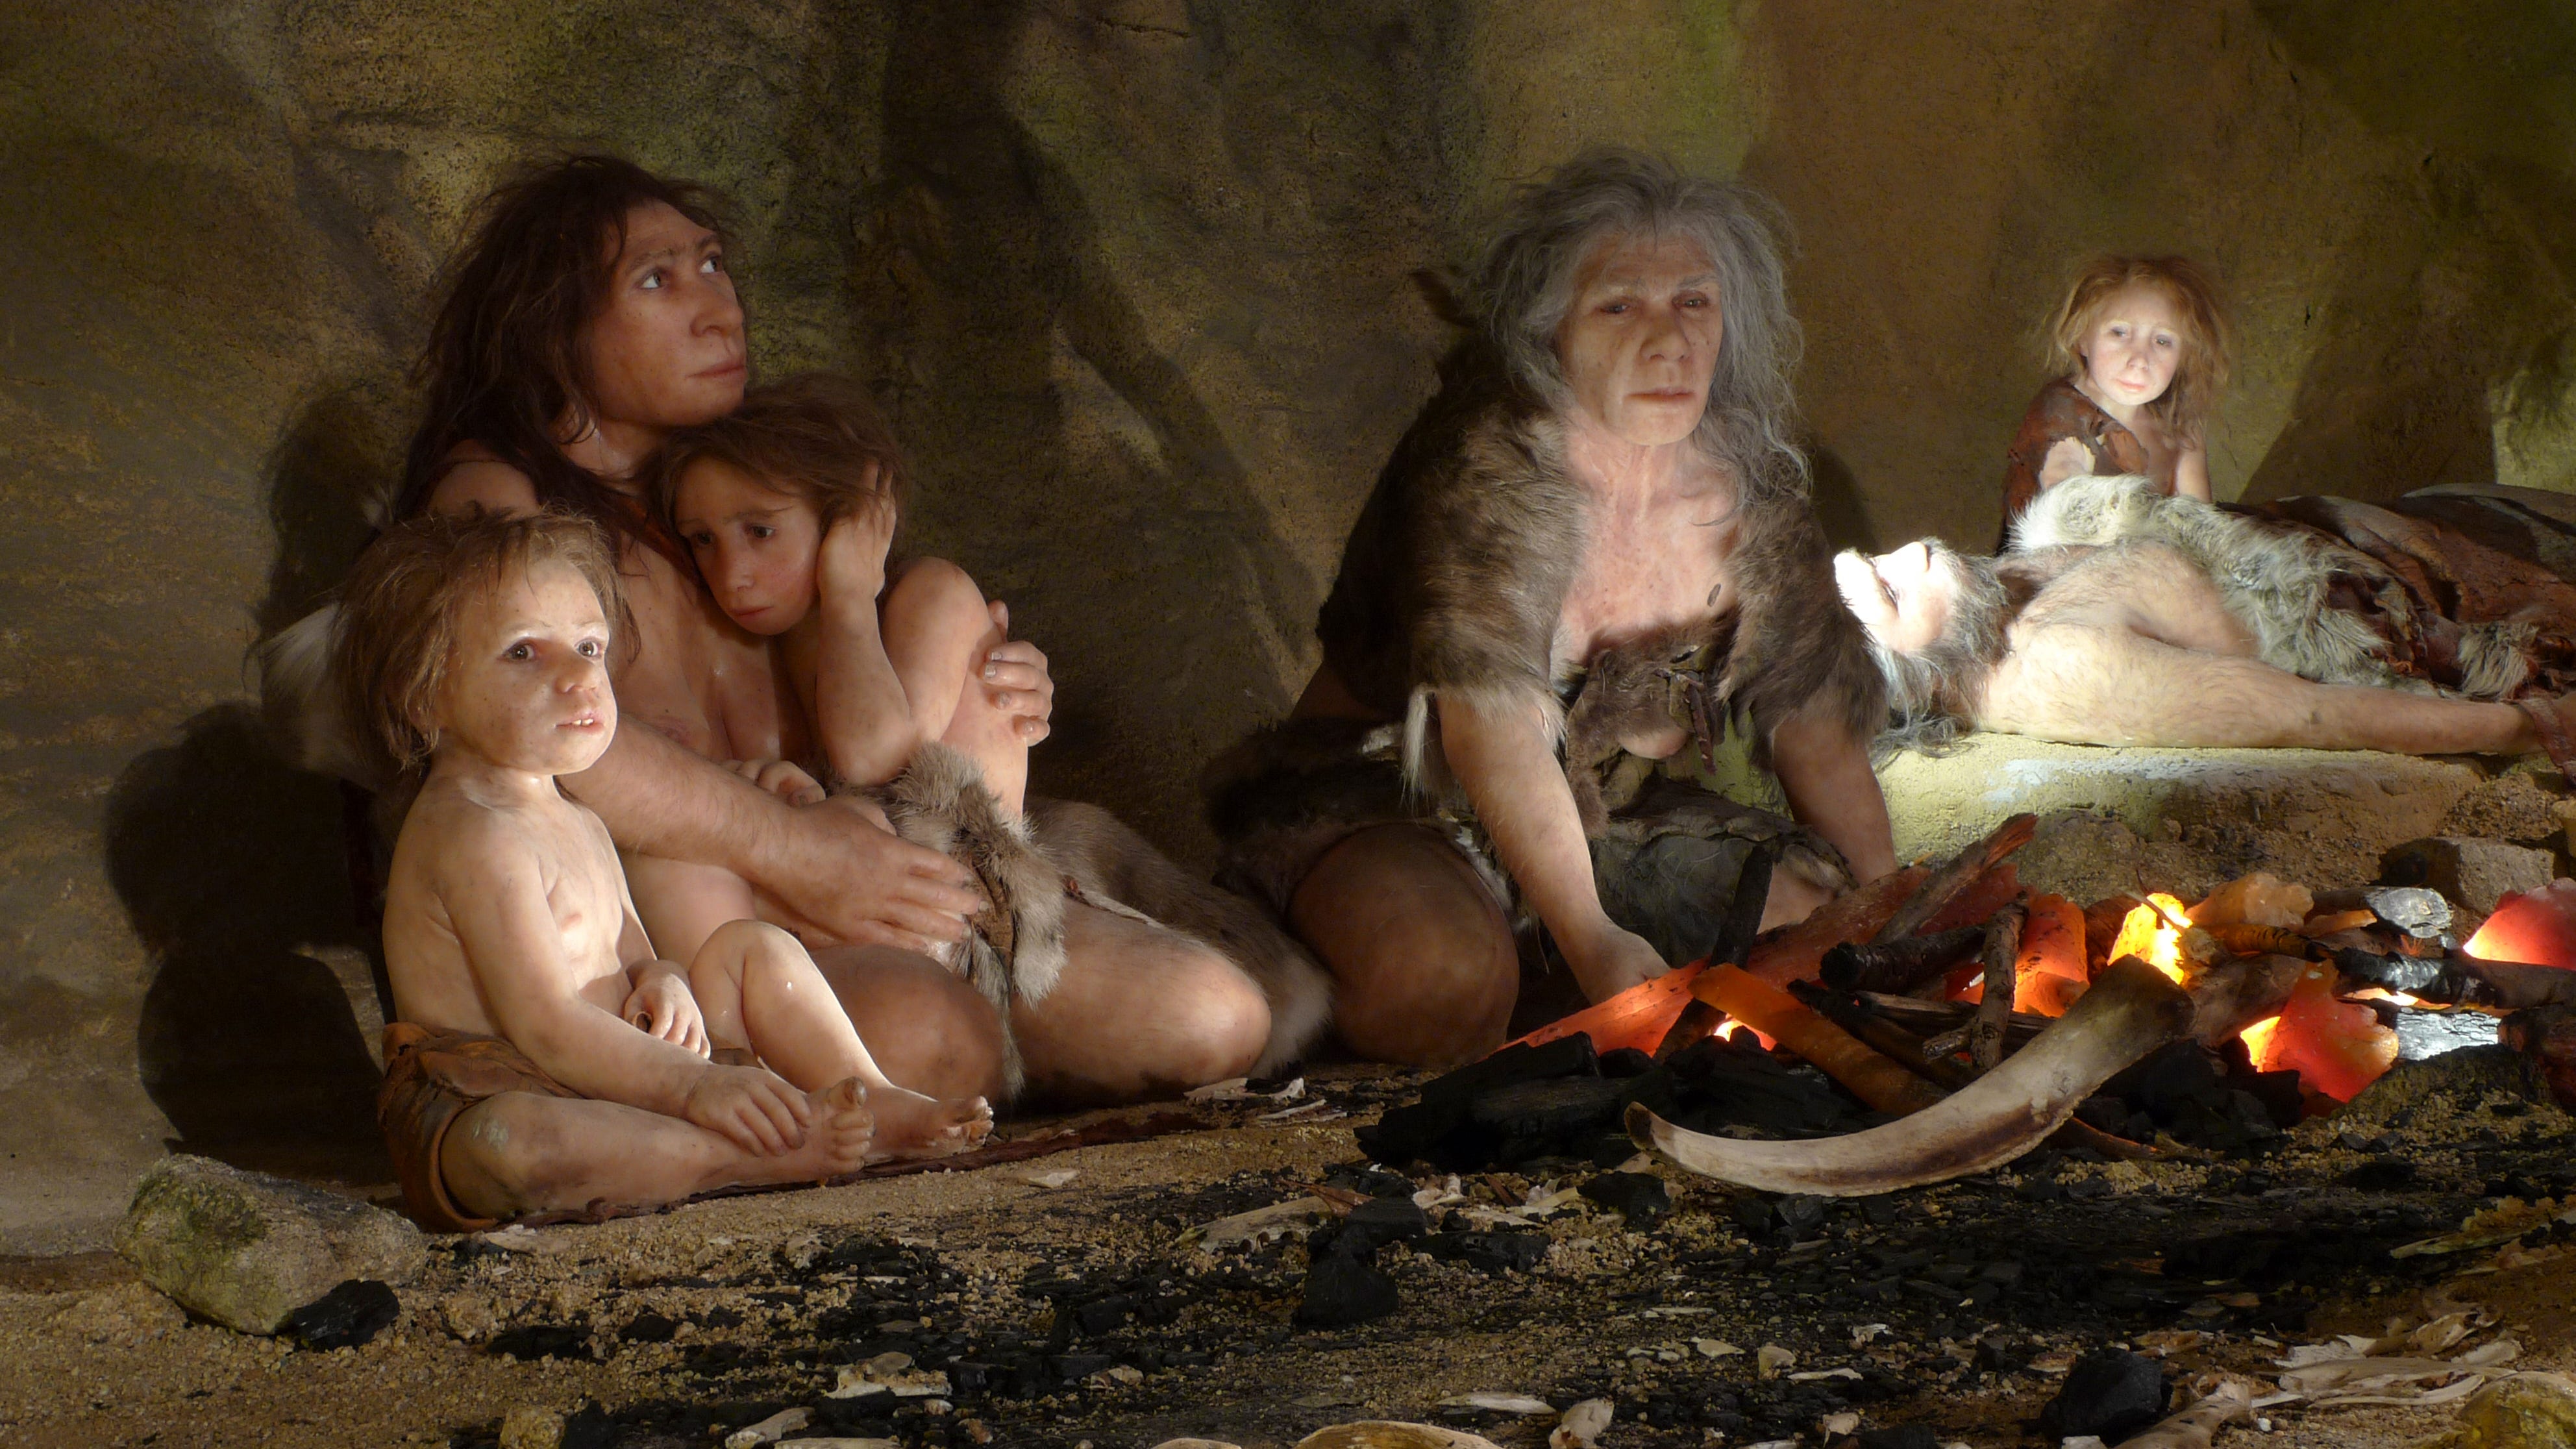 'intellectually inferior' humans caused neanderthals to go extinct, a new book claims